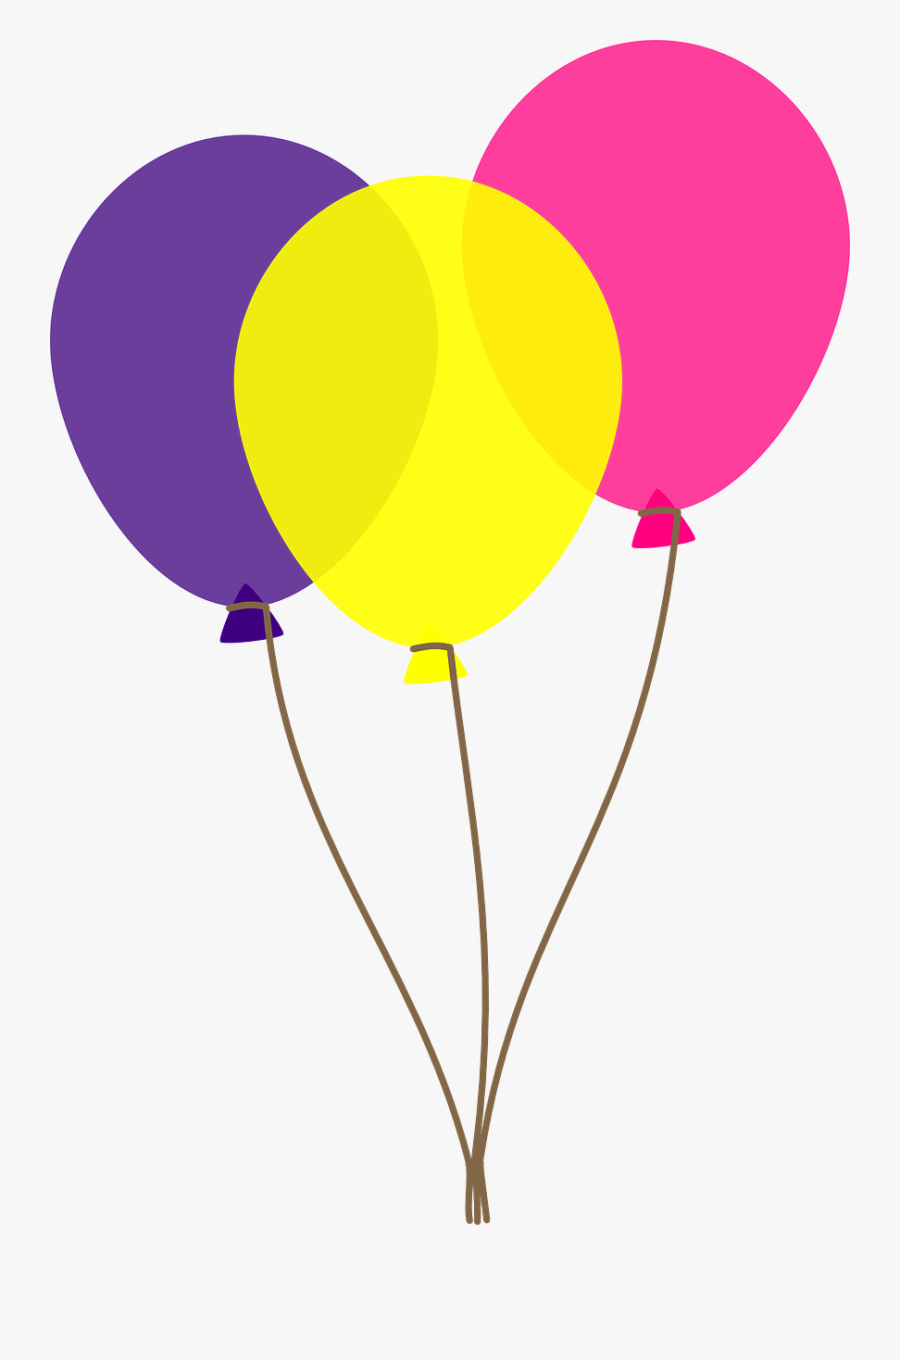 Balloon Free To Use Clip Art - Balloons Clipart, Transparent Clipart